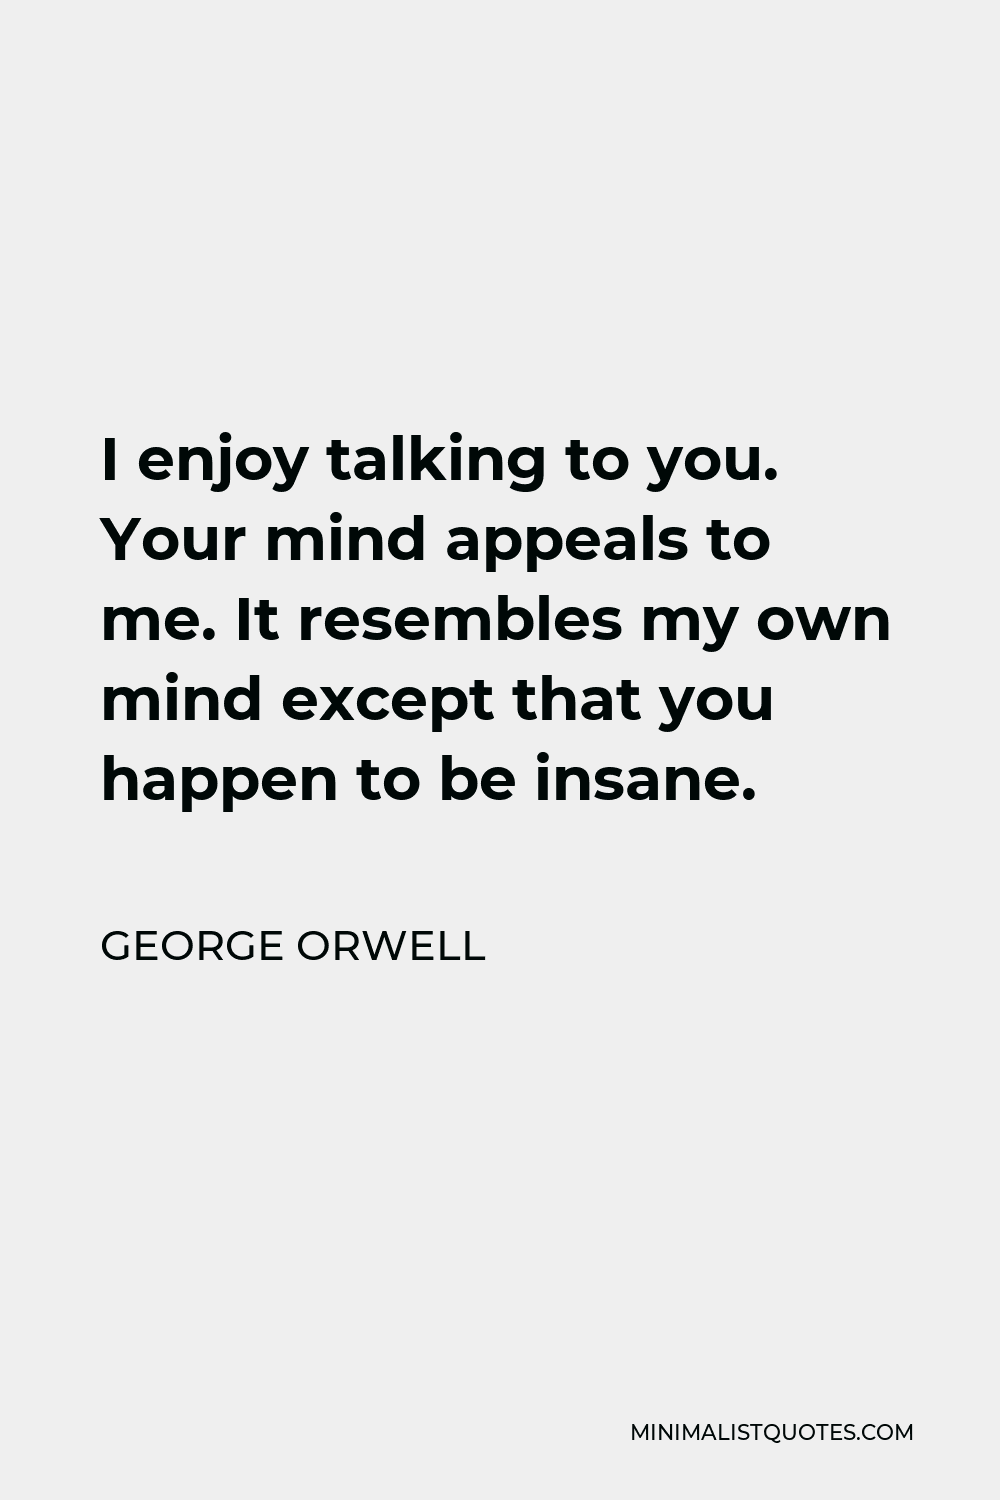 George Orwell Quote I enjoy talking to you. Your mind appeals to ...